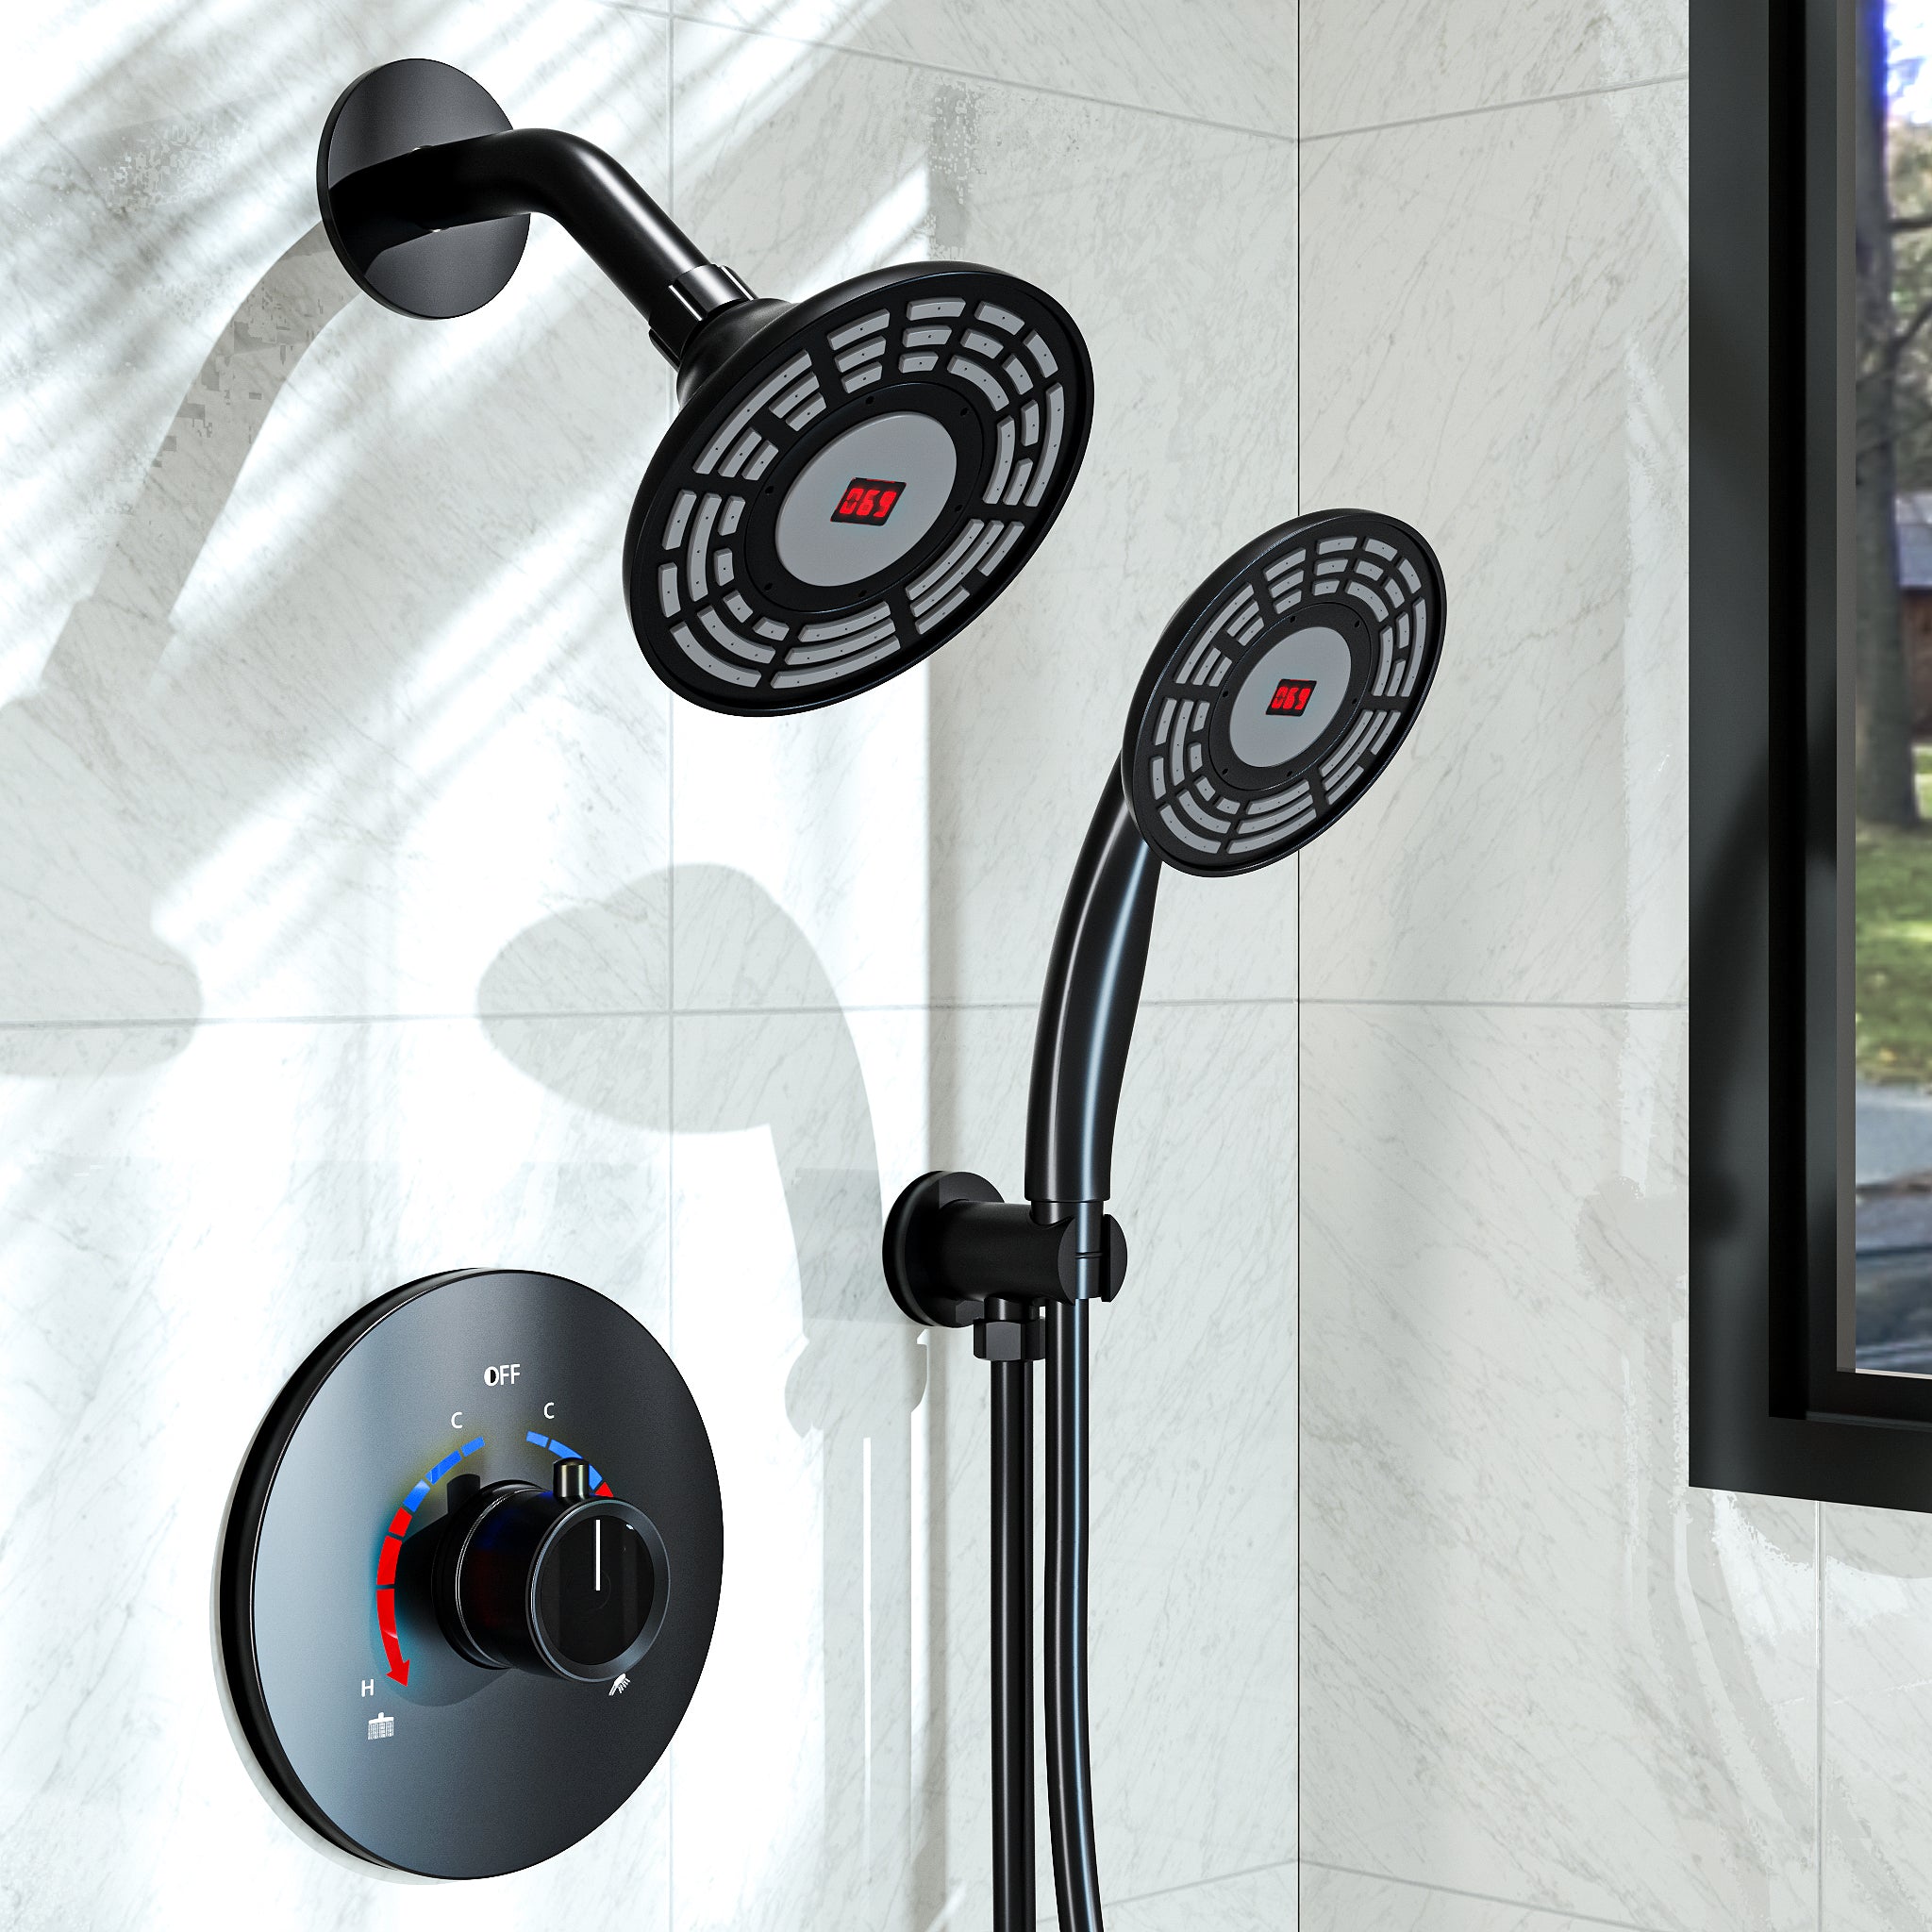 SFS-1019-BK5 Pressure-Balanced (Temperature Control Only) Shower Faucet with Rough in-Valve